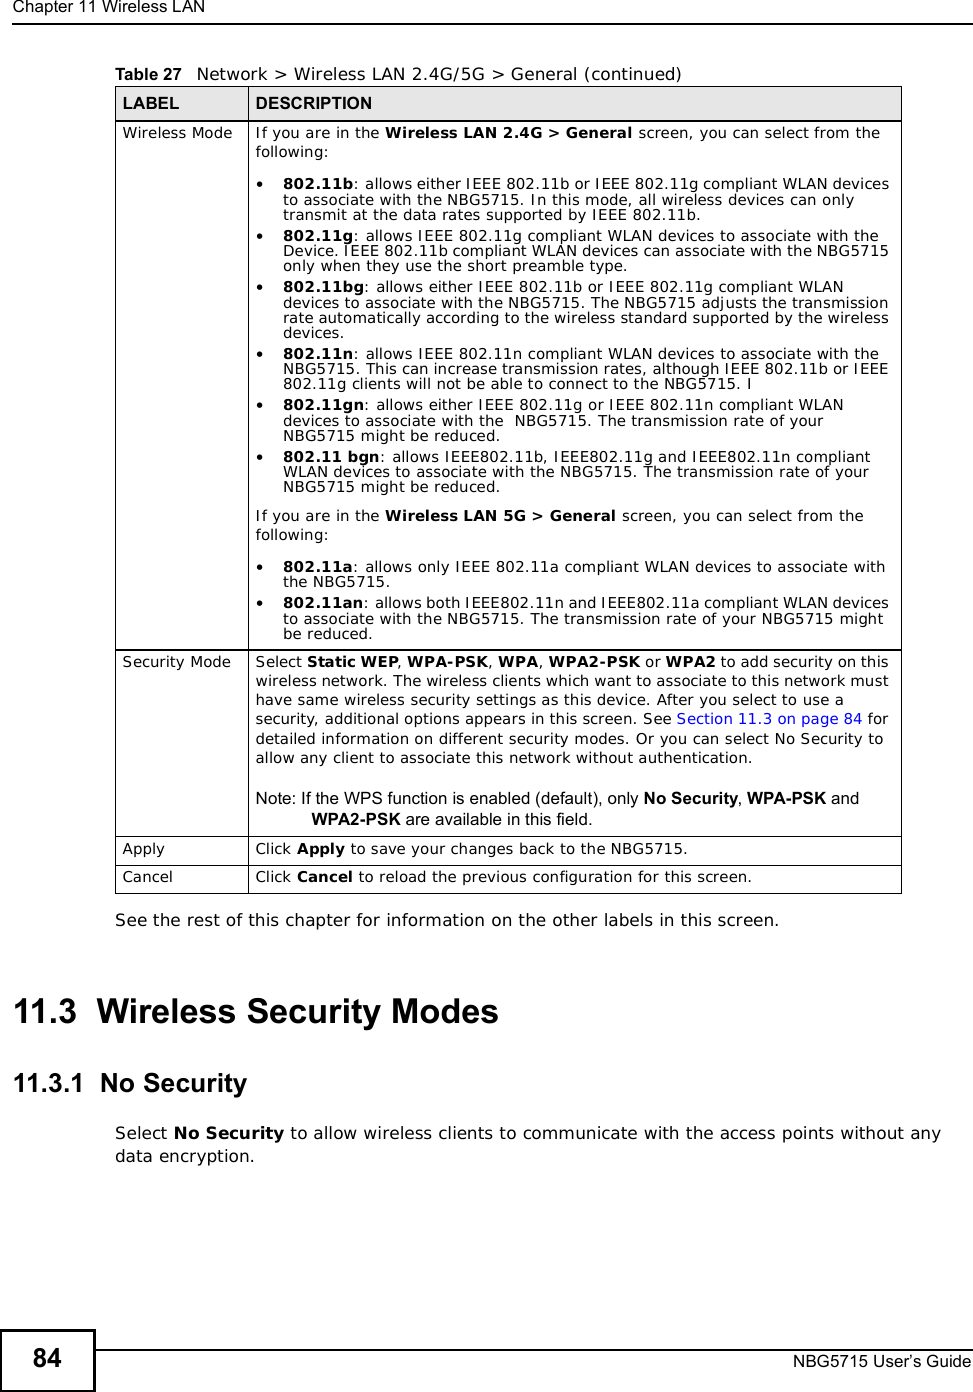 Chapter 11Wireless LANNBG5715 User’s Guide84See the rest of this chapter for information on the other labels in this screen. 11.3  Wireless Security Modes11.3.1  No SecuritySelect No Security to allow wireless clients to communicate with the access points without any data encryption.Wireless Mode If you are in the Wireless LAN 2.4G &gt; General screen, you can select from the following:•802.11b: allows either IEEE 802.11b or IEEE 802.11g compliant WLAN devices to associate with the NBG5715. In this mode, all wireless devices can only transmit at the data rates supported by IEEE 802.11b.•802.11g: allows IEEE 802.11g compliant WLAN devices to associate with the Device. IEEE 802.11b compliant WLAN devices can associate with the NBG5715 only when they use the short preamble type.•802.11bg: allows either IEEE 802.11b or IEEE 802.11g compliant WLAN devices to associate with the NBG5715. The NBG5715 adjusts the transmission rate automatically according to the wireless standard supported by the wireless devices.•802.11n: allows IEEE 802.11n compliant WLAN devices to associate with the NBG5715. This can increase transmission rates, although IEEE 802.11b or IEEE 802.11g clients will not be able to connect to the NBG5715. I•802.11gn: allows either IEEE 802.11g or IEEE 802.11n compliant WLAN devices to associate with the  NBG5715. The transmission rate of your  NBG5715 might be reduced.•802.11 bgn: allows IEEE802.11b, IEEE802.11g and IEEE802.11n compliant WLAN devices to associate with the NBG5715. The transmission rate of your NBG5715 might be reduced.If you are in the Wireless LAN 5G &gt; General screen, you can select from the following:•802.11a: allows only IEEE 802.11a compliant WLAN devices to associate with the NBG5715.•802.11an: allows both IEEE802.11n and IEEE802.11a compliant WLAN devices to associate with the NBG5715. The transmission rate of your NBG5715 might be reduced. Security Mode Select Static WEP,WPA-PSK,WPA,WPA2-PSK or WPA2 to add security on this wireless network. The wireless clients which want to associate to this network must have same wireless security settings as this device. After you select to use a security, additional options appears in this screen. See Section 11.3 on page 84 for detailed information on different security modes. Or you can select No Security to allow any client to associate this network without authentication.Note: If the WPS function is enabled (default), only No Security,WPA-PSK and WPA2-PSK are available in this field.Apply Click Apply to save your changes back to the NBG5715.Cancel Click Cancel to reload the previous configuration for this screen.Table 27   Network &gt; Wireless LAN 2.4G/5G &gt; General (continued)LABEL DESCRIPTION